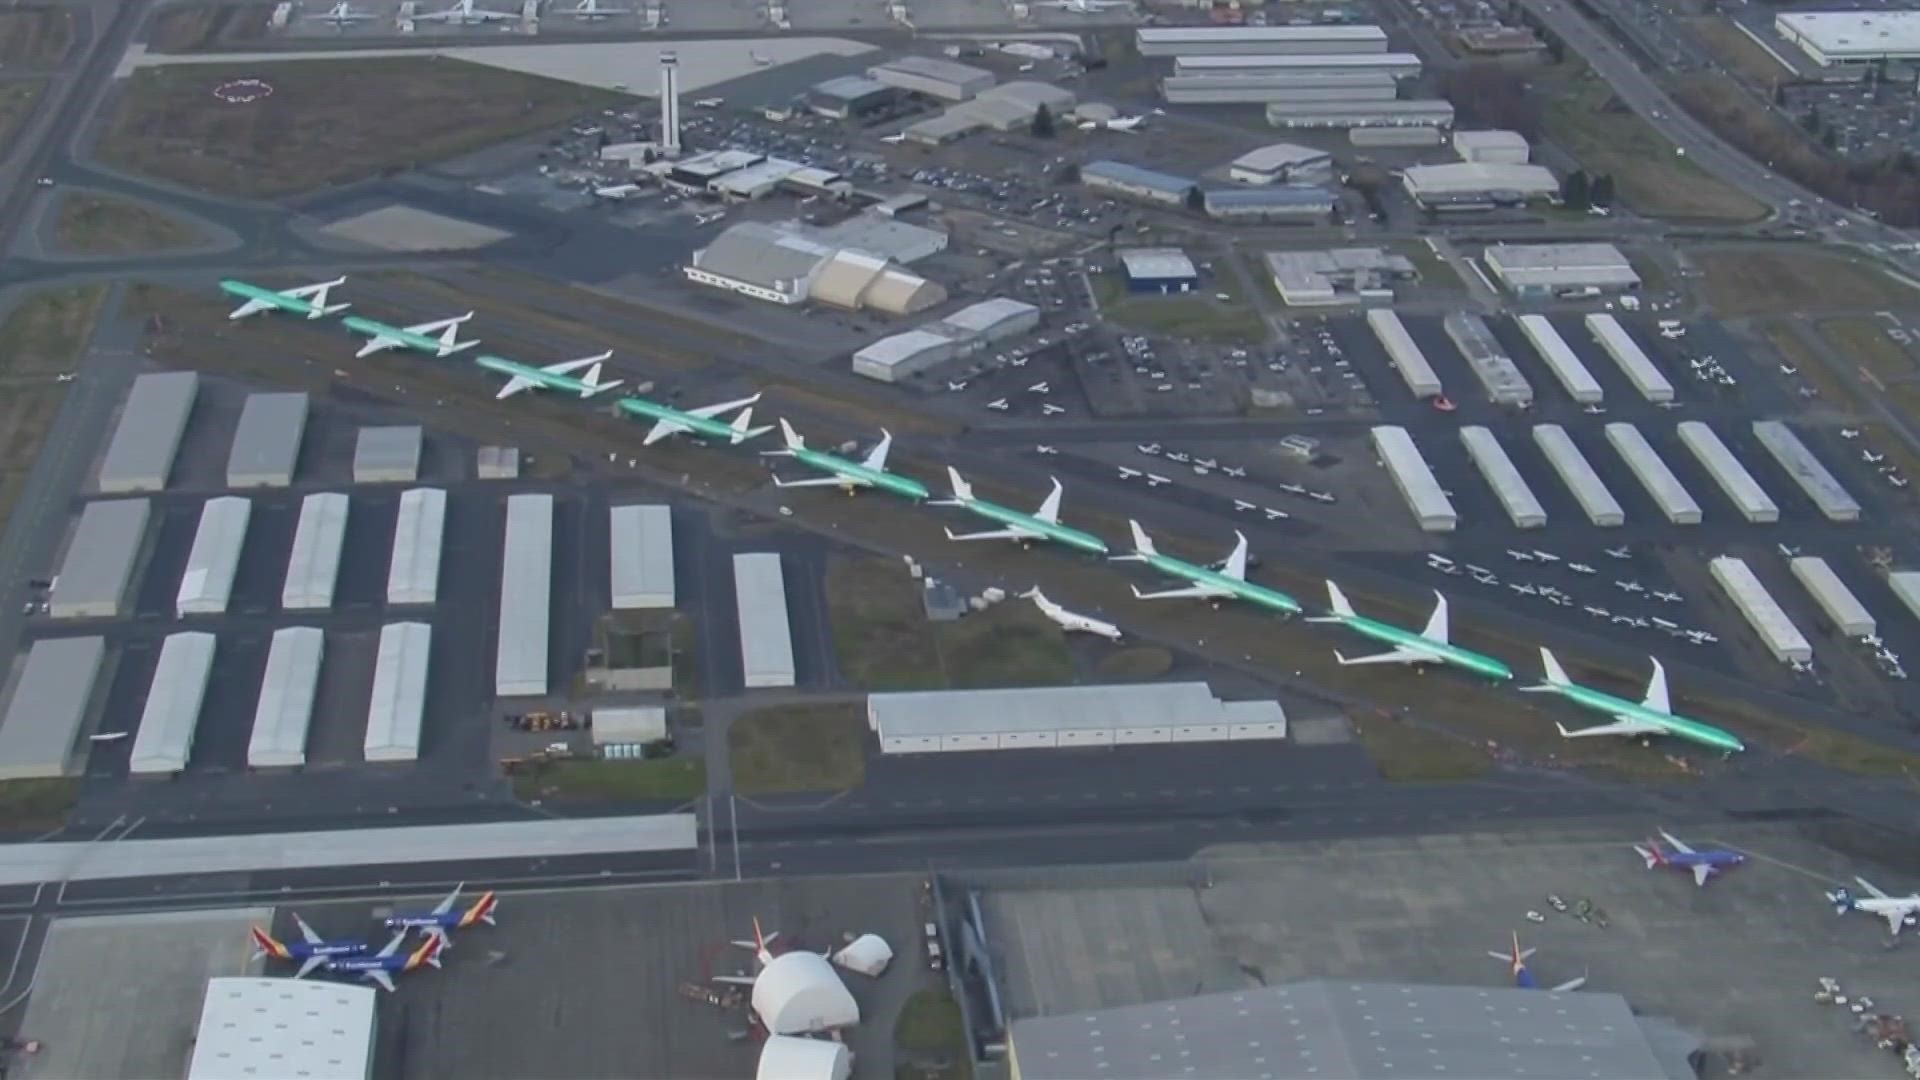 Boeing has room in the Everett plant because it will no longer build 747s and 787s there.